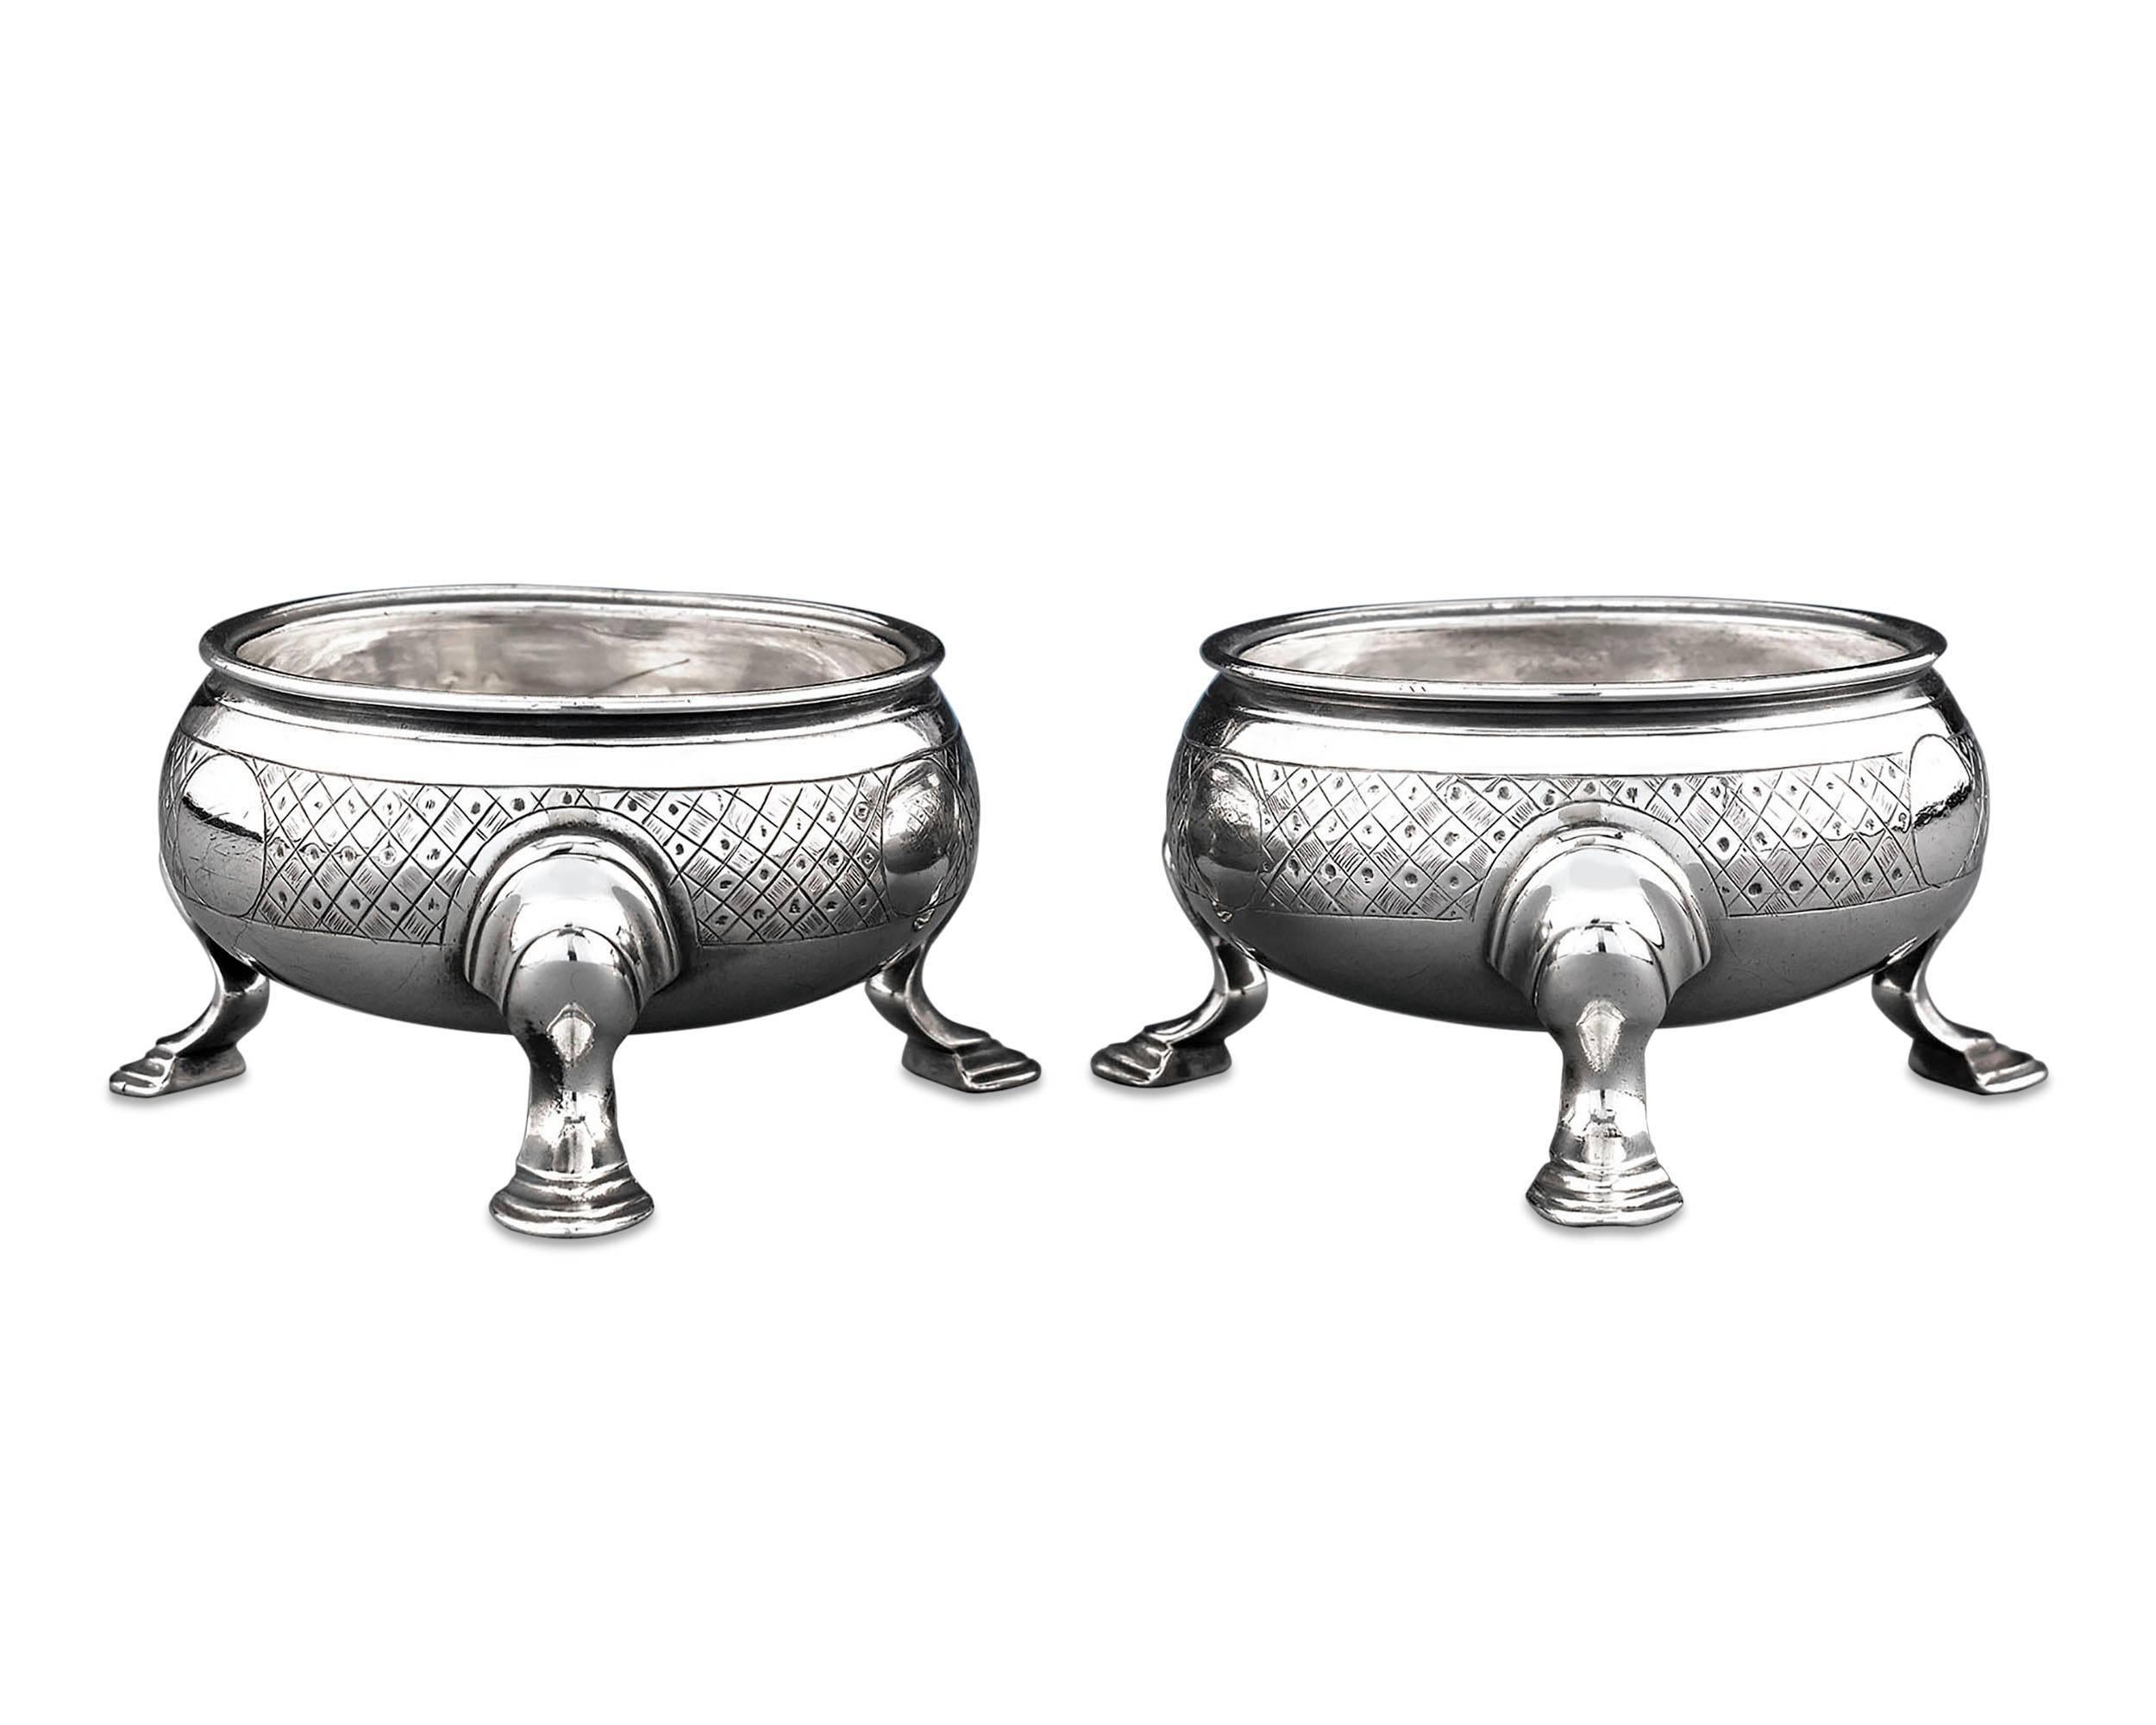 These exceptional George I-period silver salts stand as a testament to Paul de Lamerie's prodigious talent and celebrated eye for sophistication. The works of master silversmith Paul de Lamerie have been widely admired for their beauty and